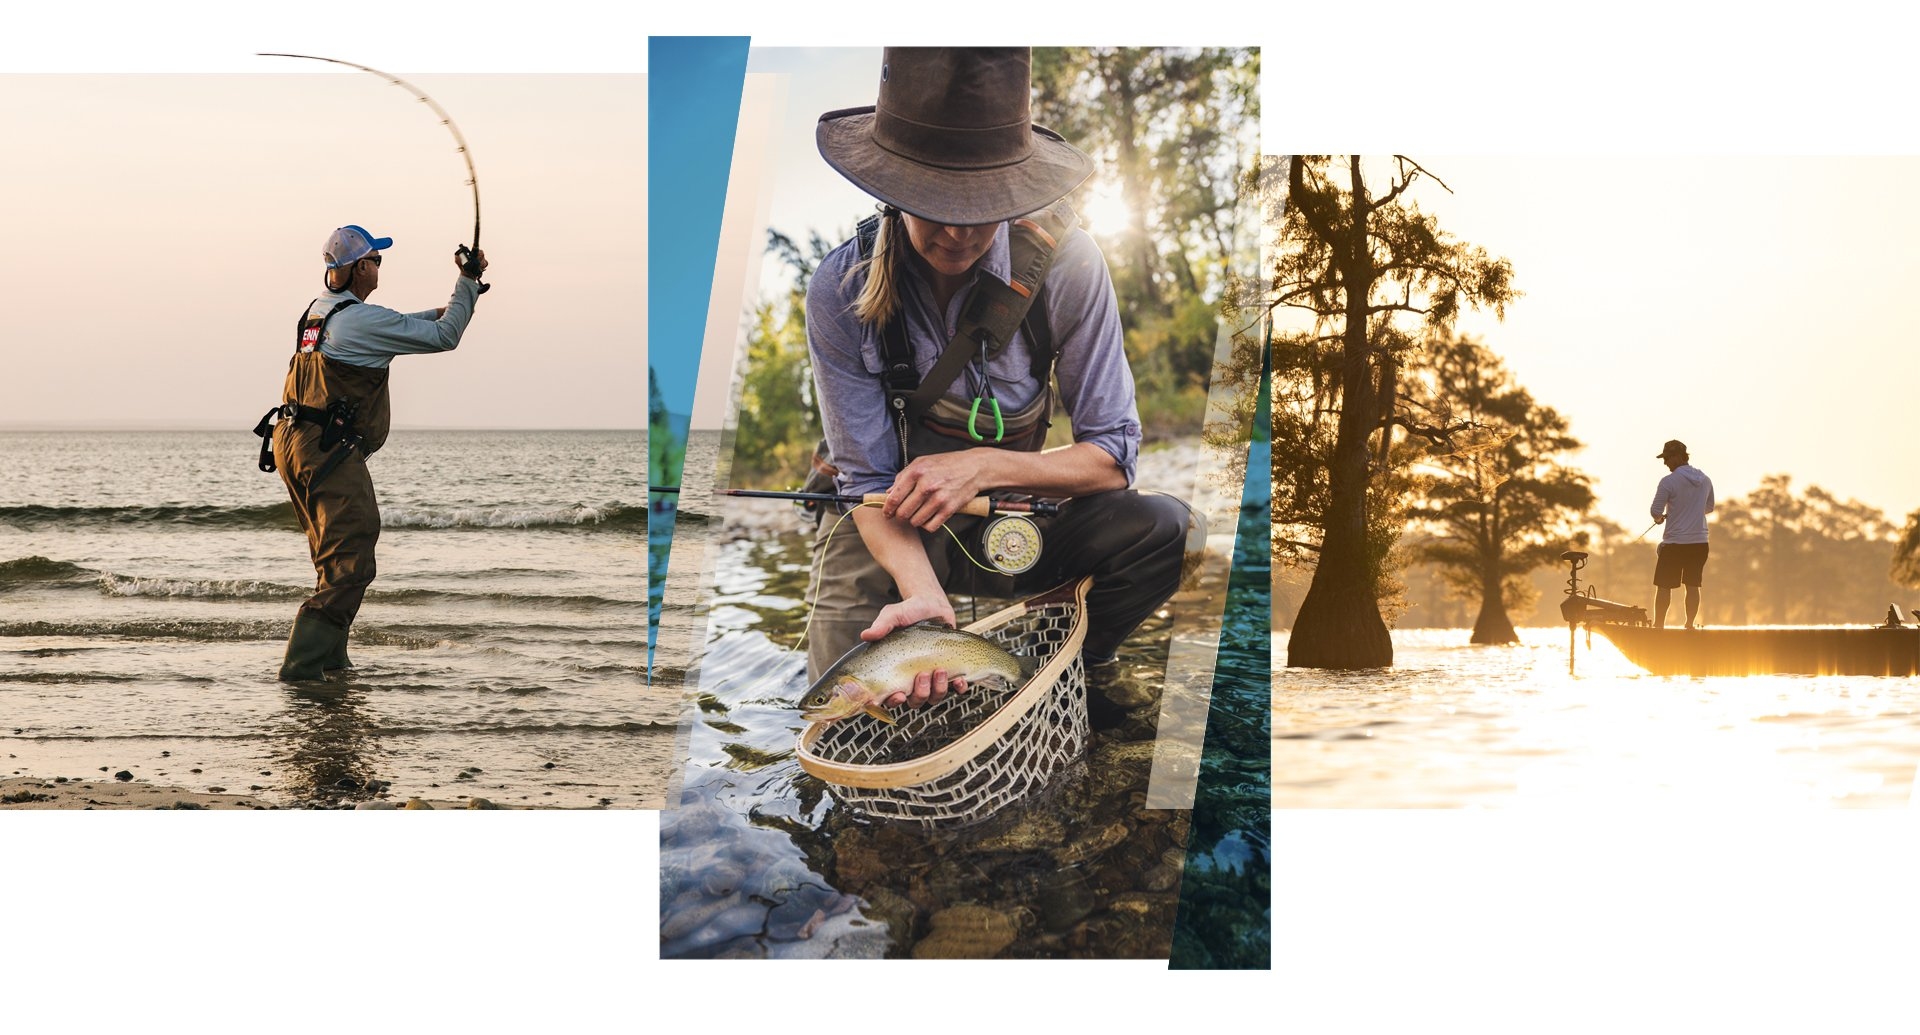 From Left to Right:  From Left to Right: Saltwater Angler Inshore fishing in the surf with PENN Rod and Reel.  Trout Angler holding small trout above net.  Bass fisherman on a bass boat at sunrise.